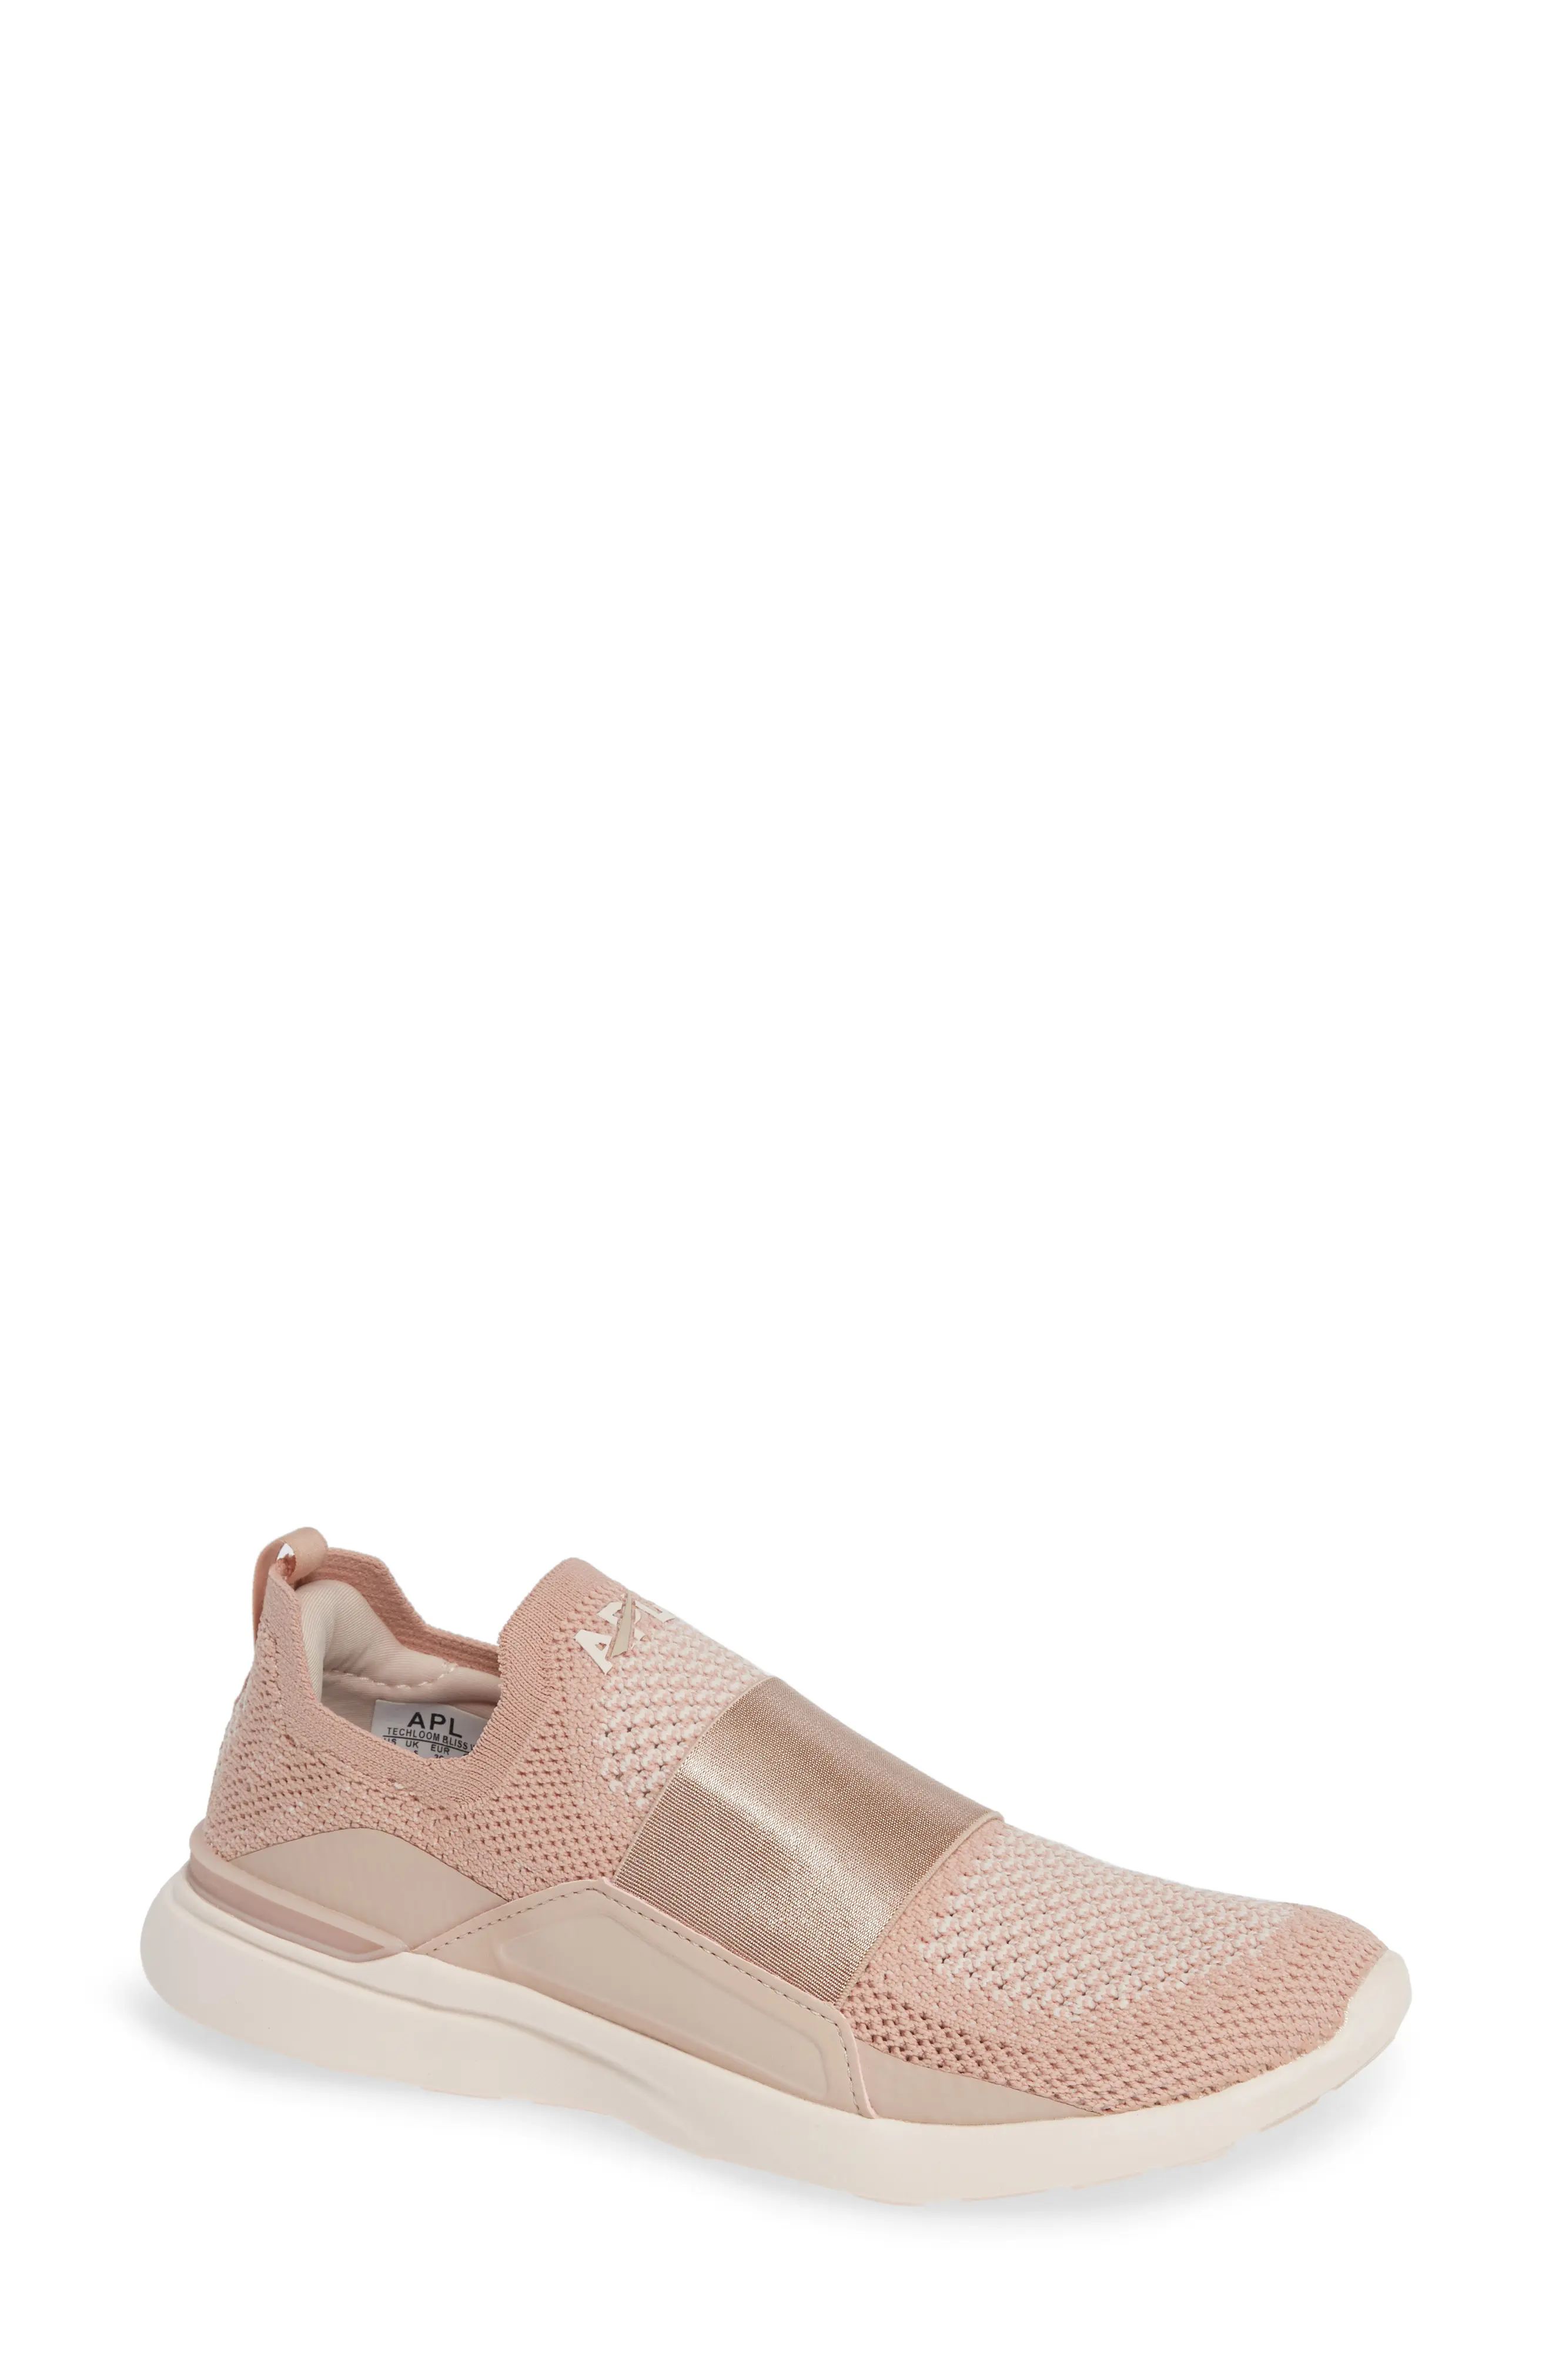 APL TechLoom Bliss Knit Running Shoe, Size 7 in Rose Dust/Nude at Nordstrom | Nordstrom